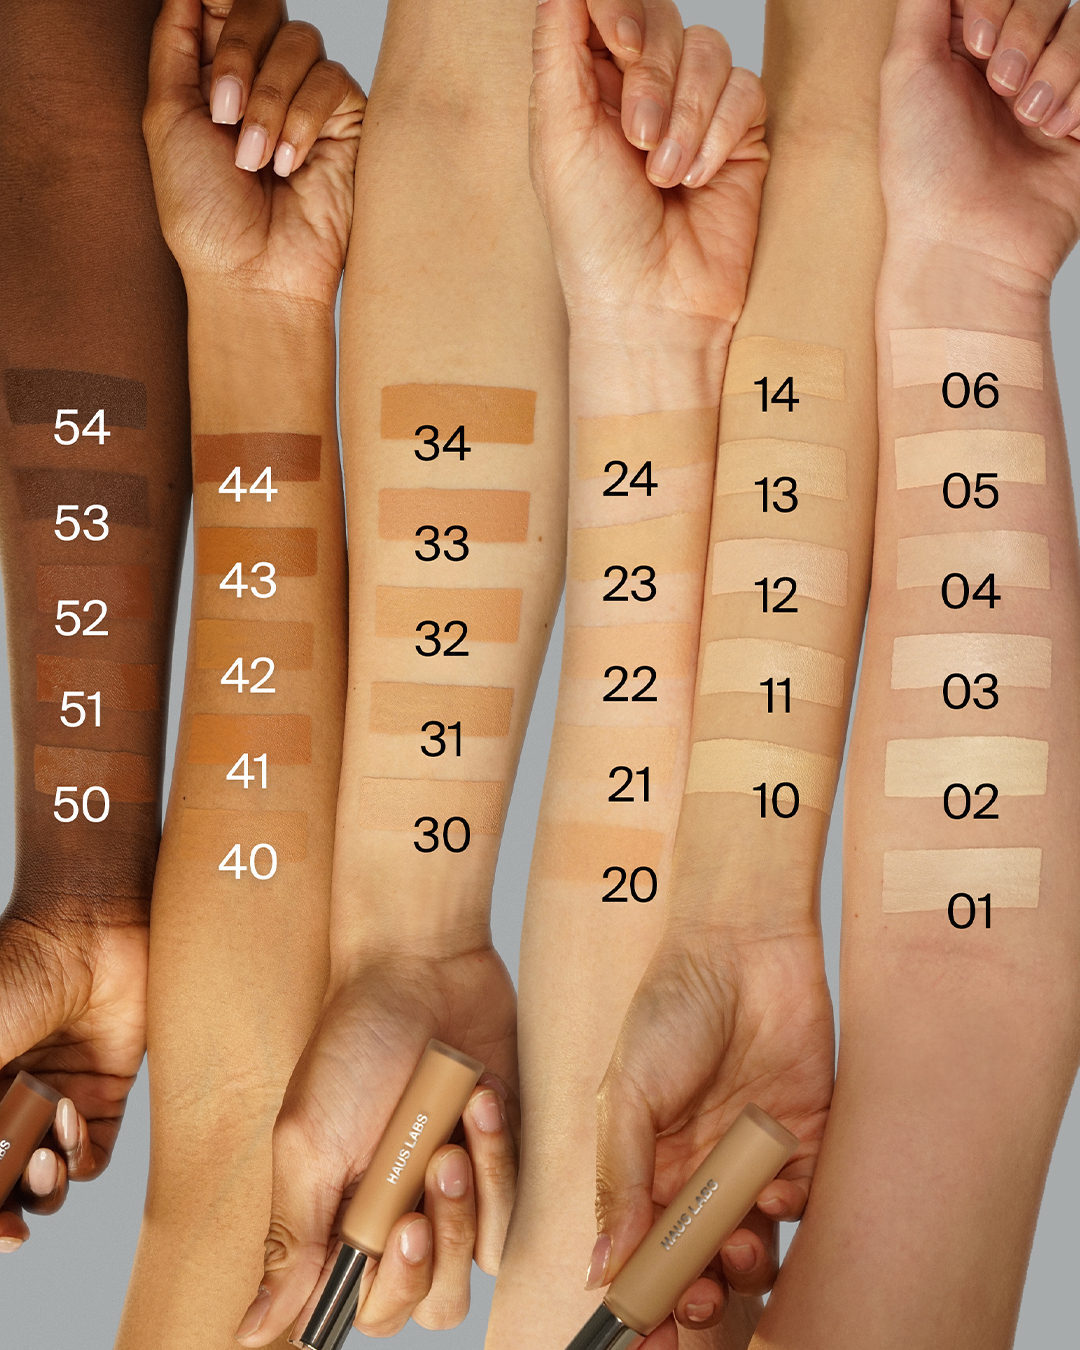 HAUS LABS Triclone Skin Tech Concealer Swatches all Shades on Skin